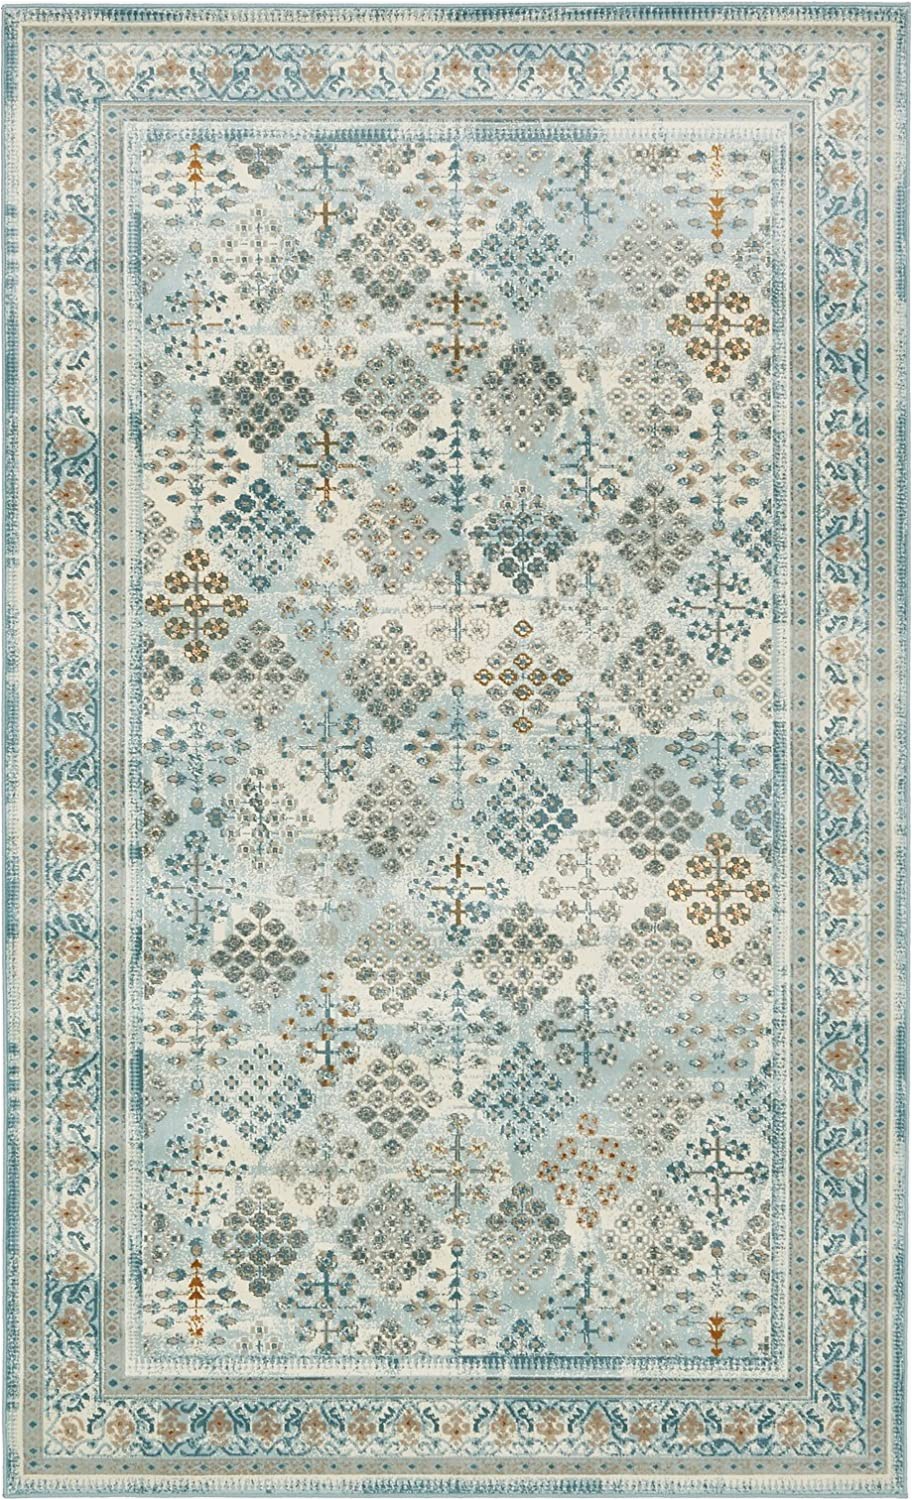 8 Ft X 8 Ft Square area Rug area Rug Vintage Light Blue 5 X 8 Ft St John Collection Rugs Inspired Overdyed Carpet